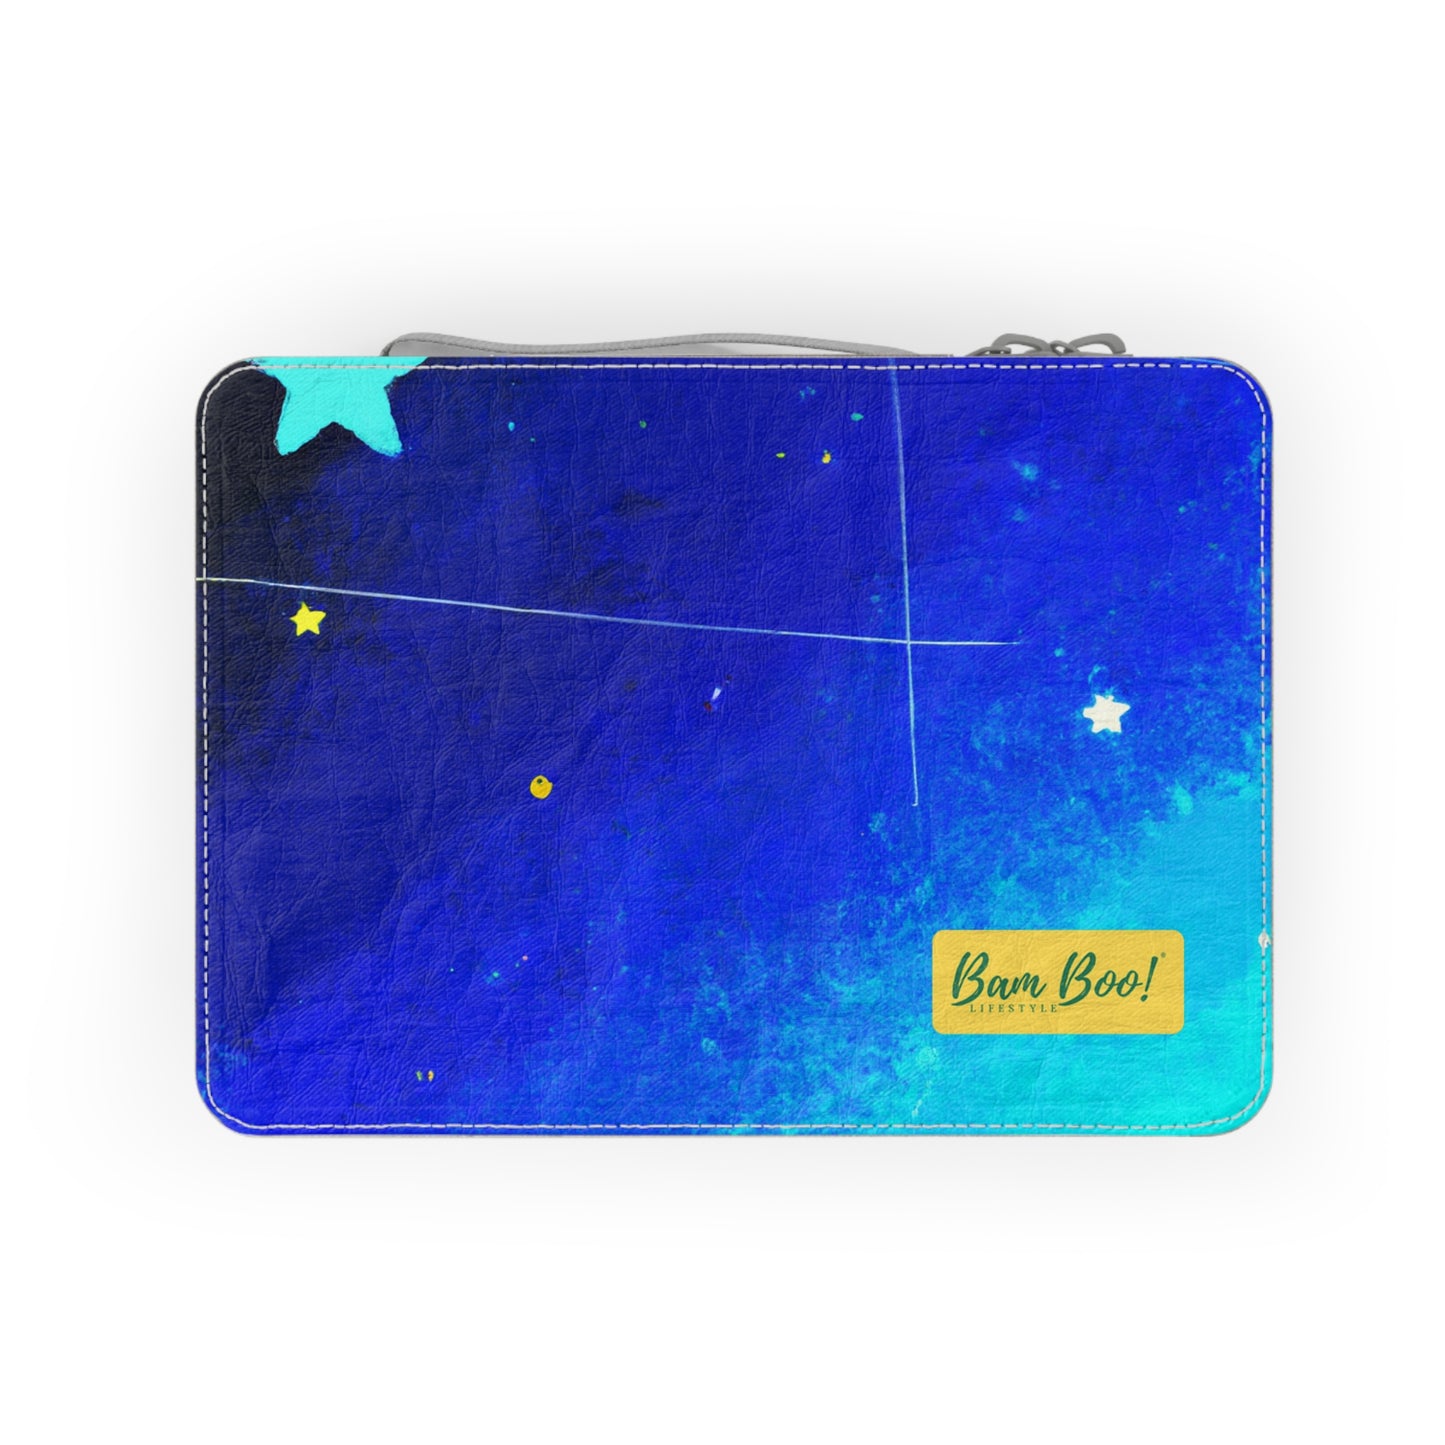 "Capturing the Stars in Abstract Night Sky Art" - Bam Boo! Lifestyle Eco-friendly Paper Lunch Bag